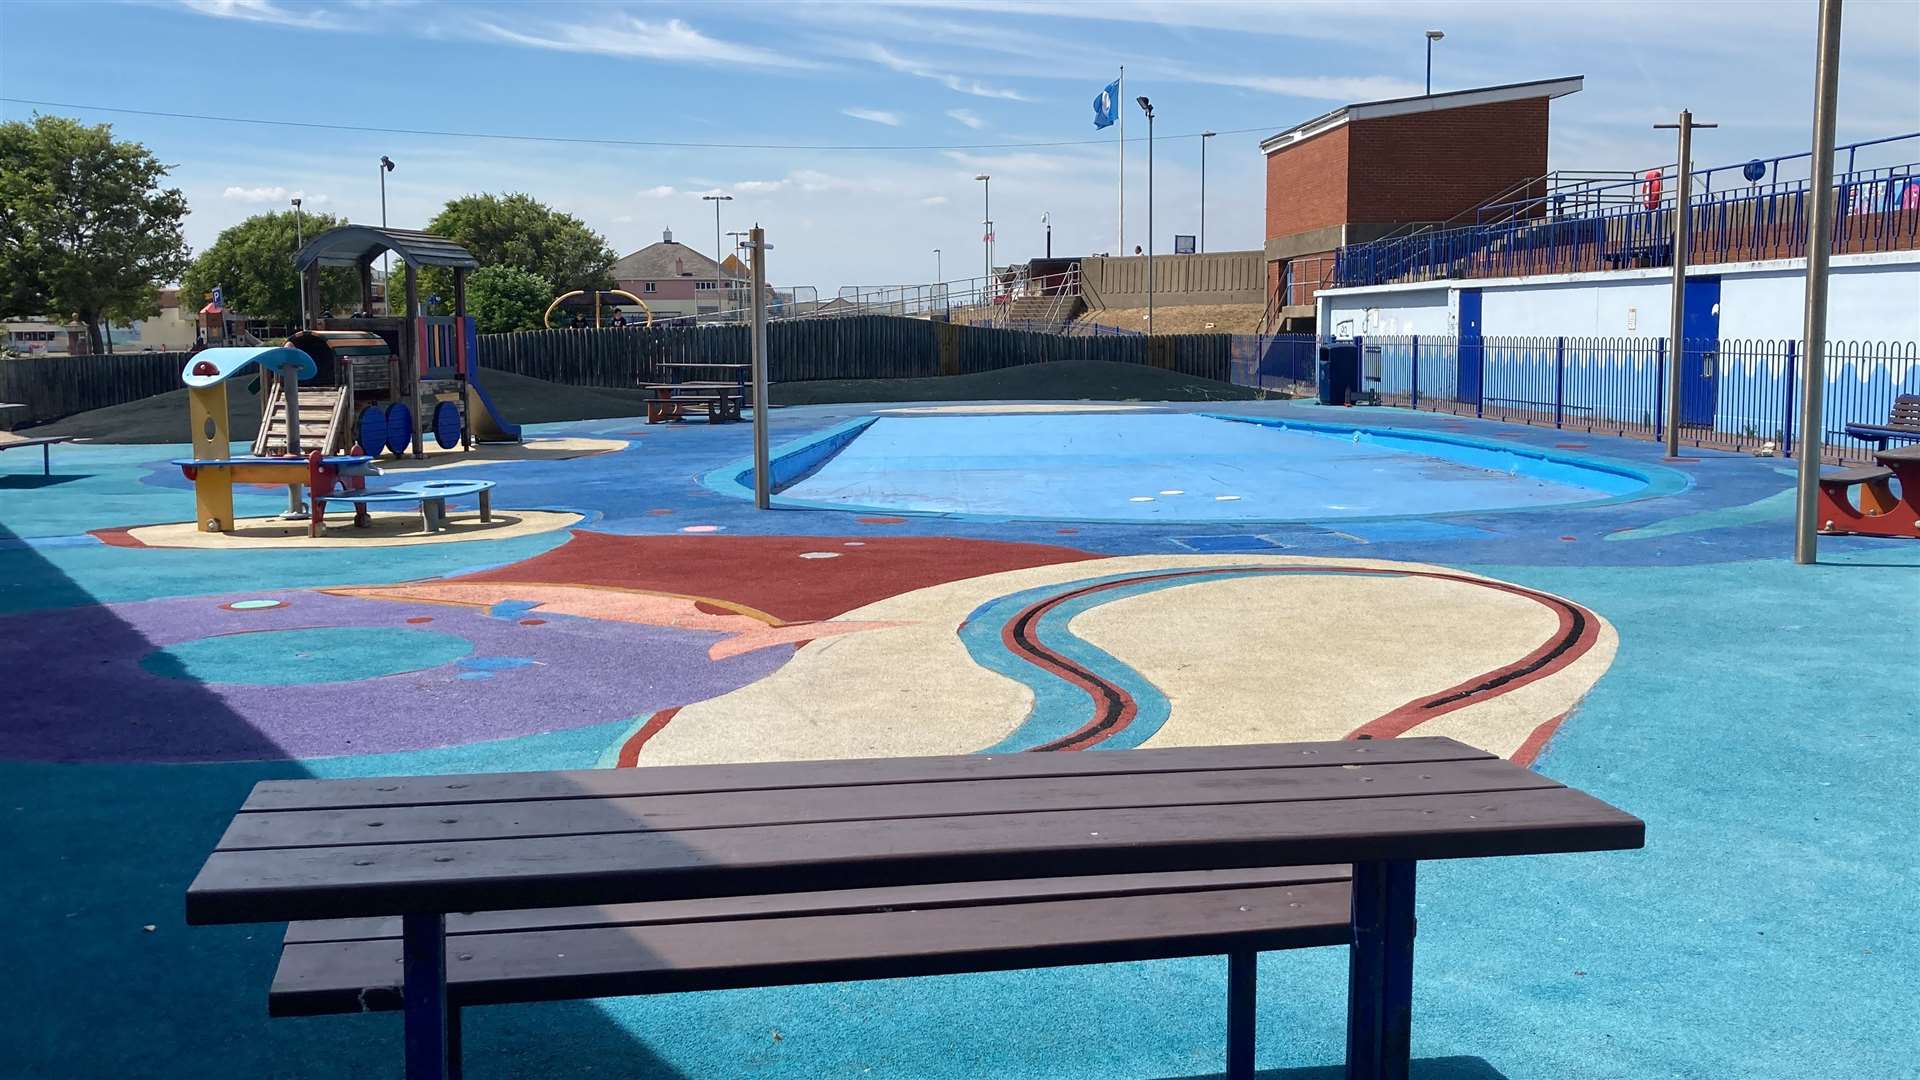 No one at the picnic tables as Sheerness paddling pool is closed again